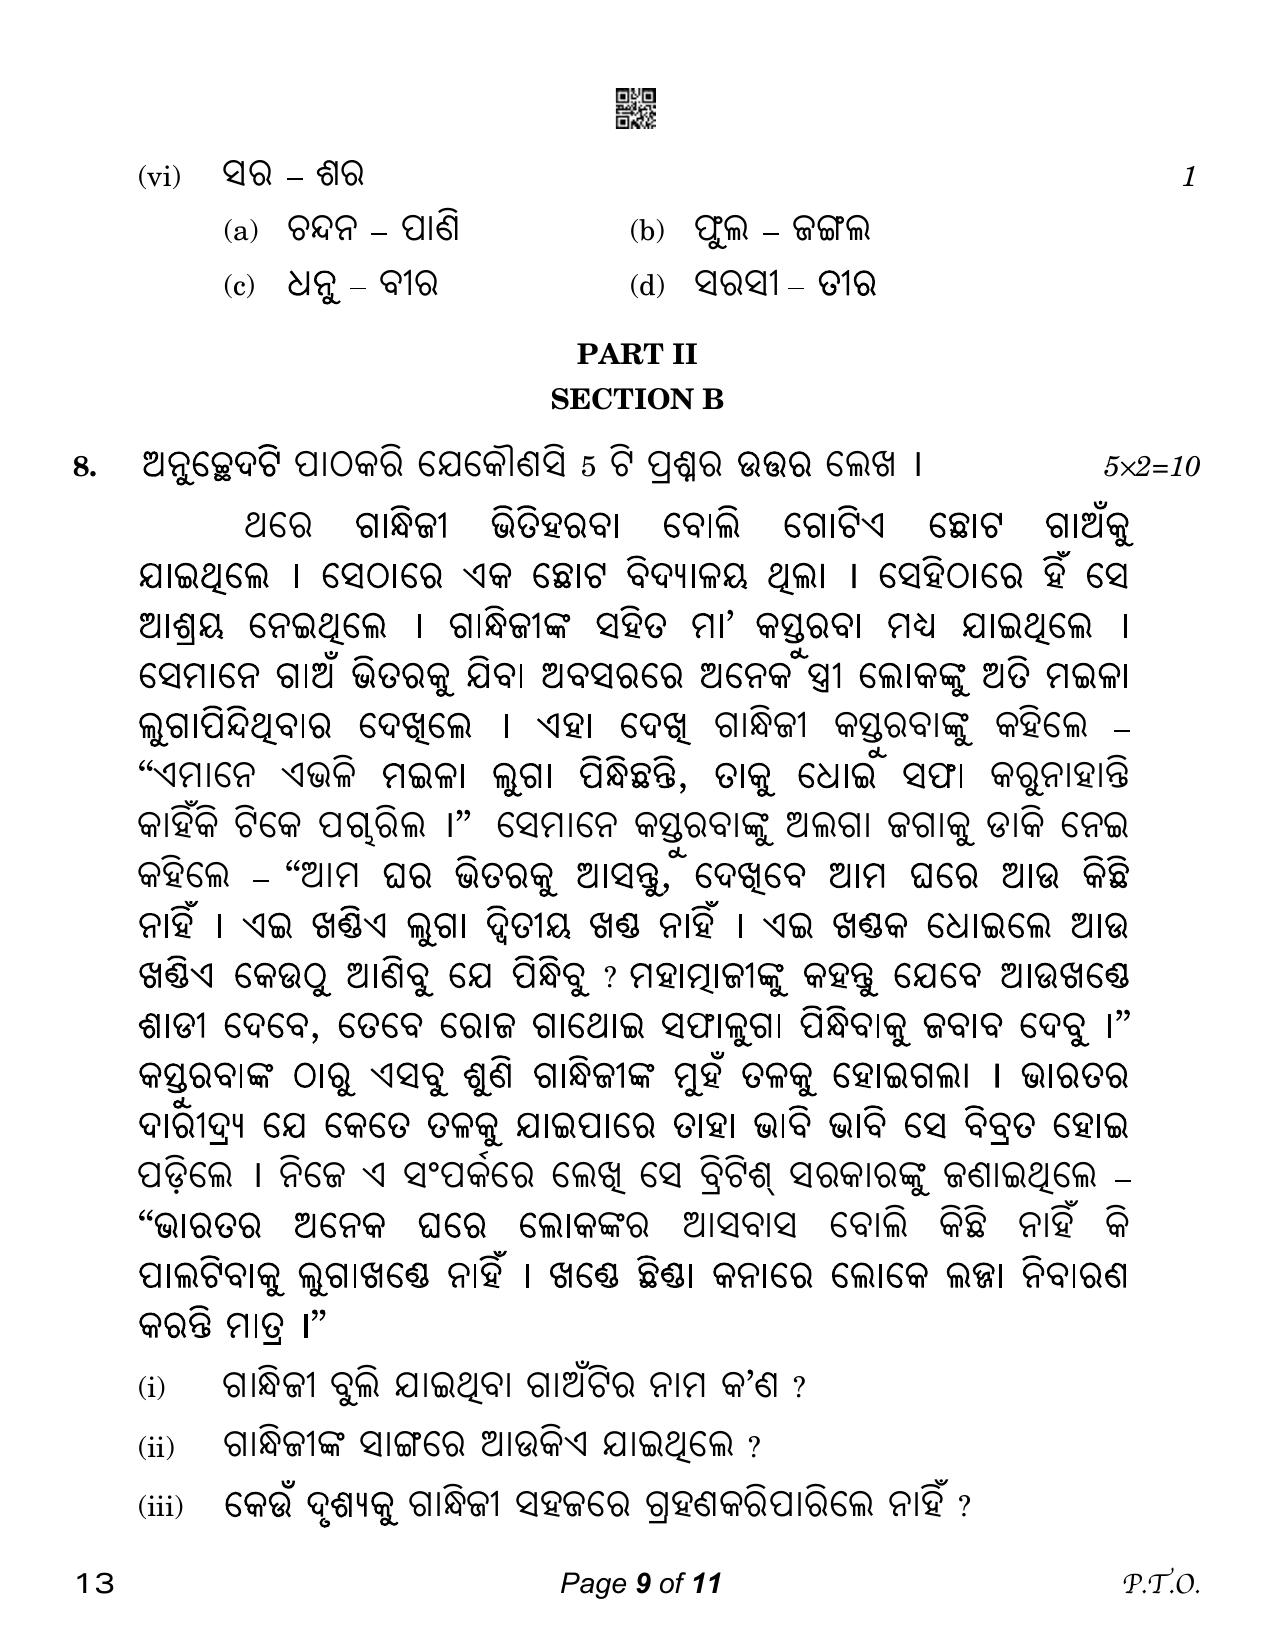 CBSE Class 12 Odia (Compartment) 2023 Question Paper - Page 9